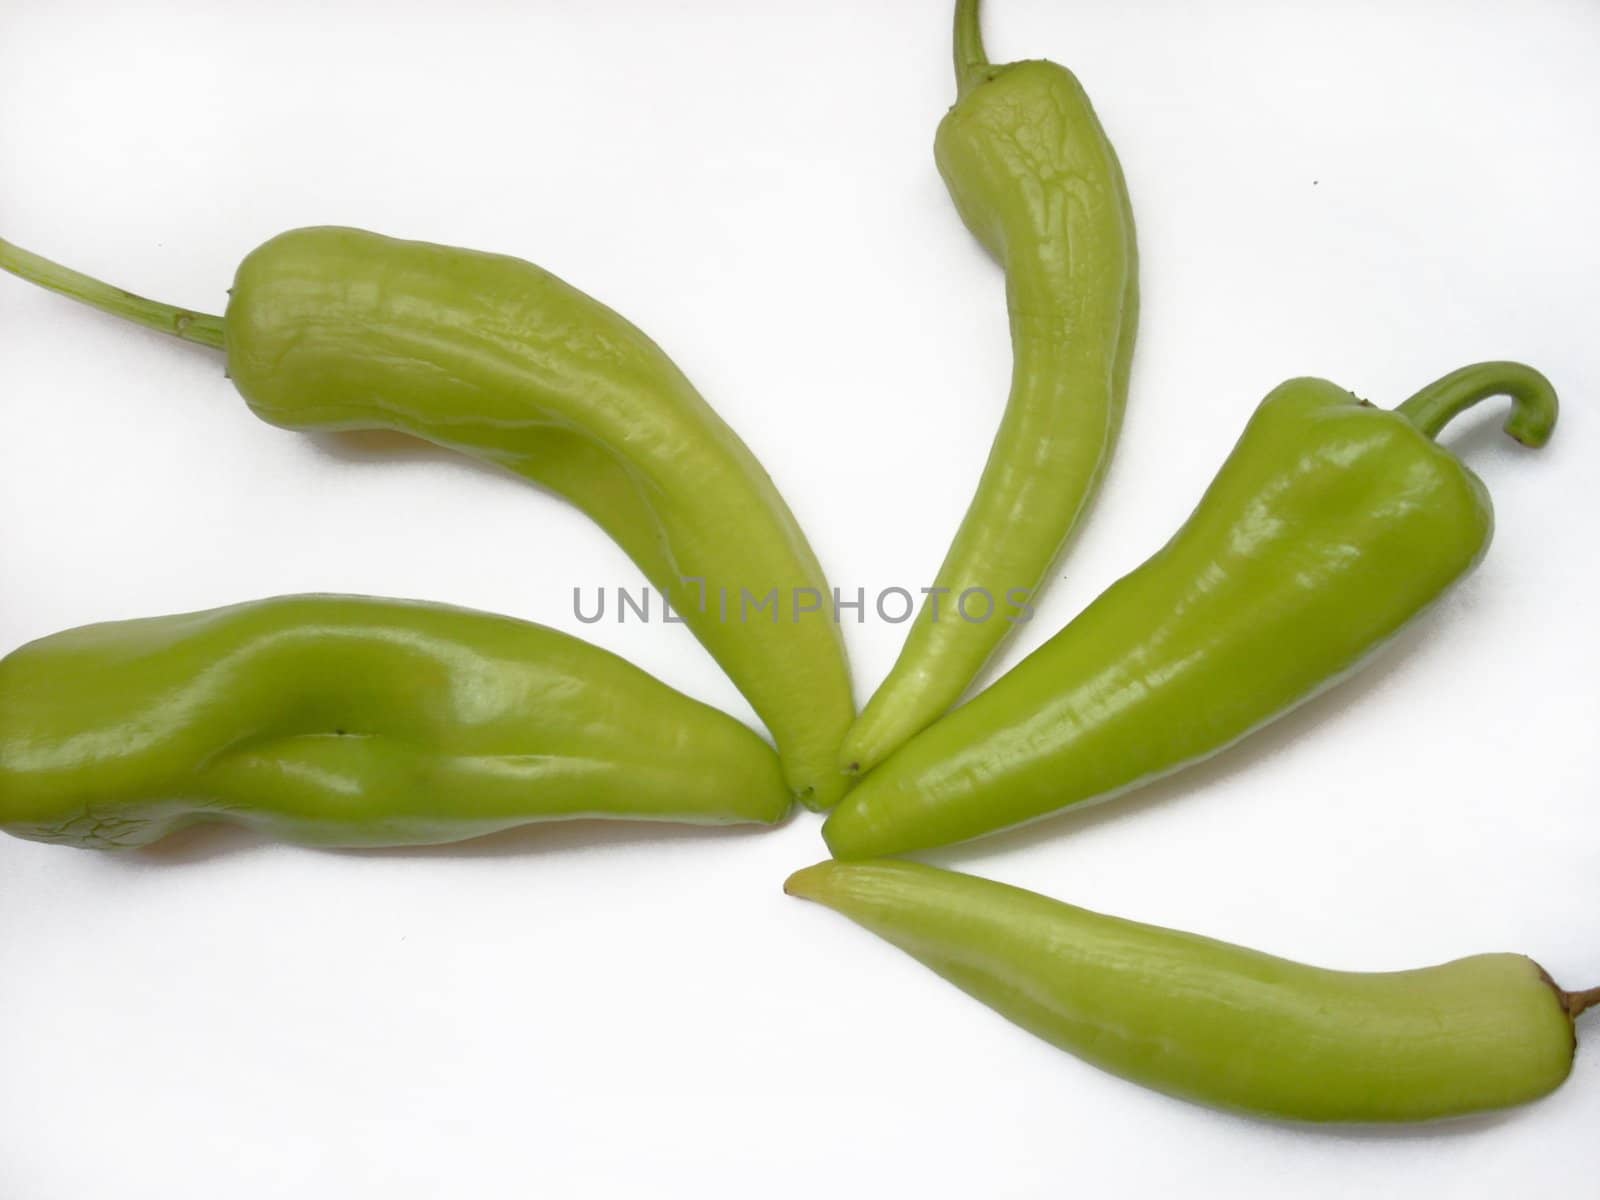 This is a photograph of some fresh sweet peppers